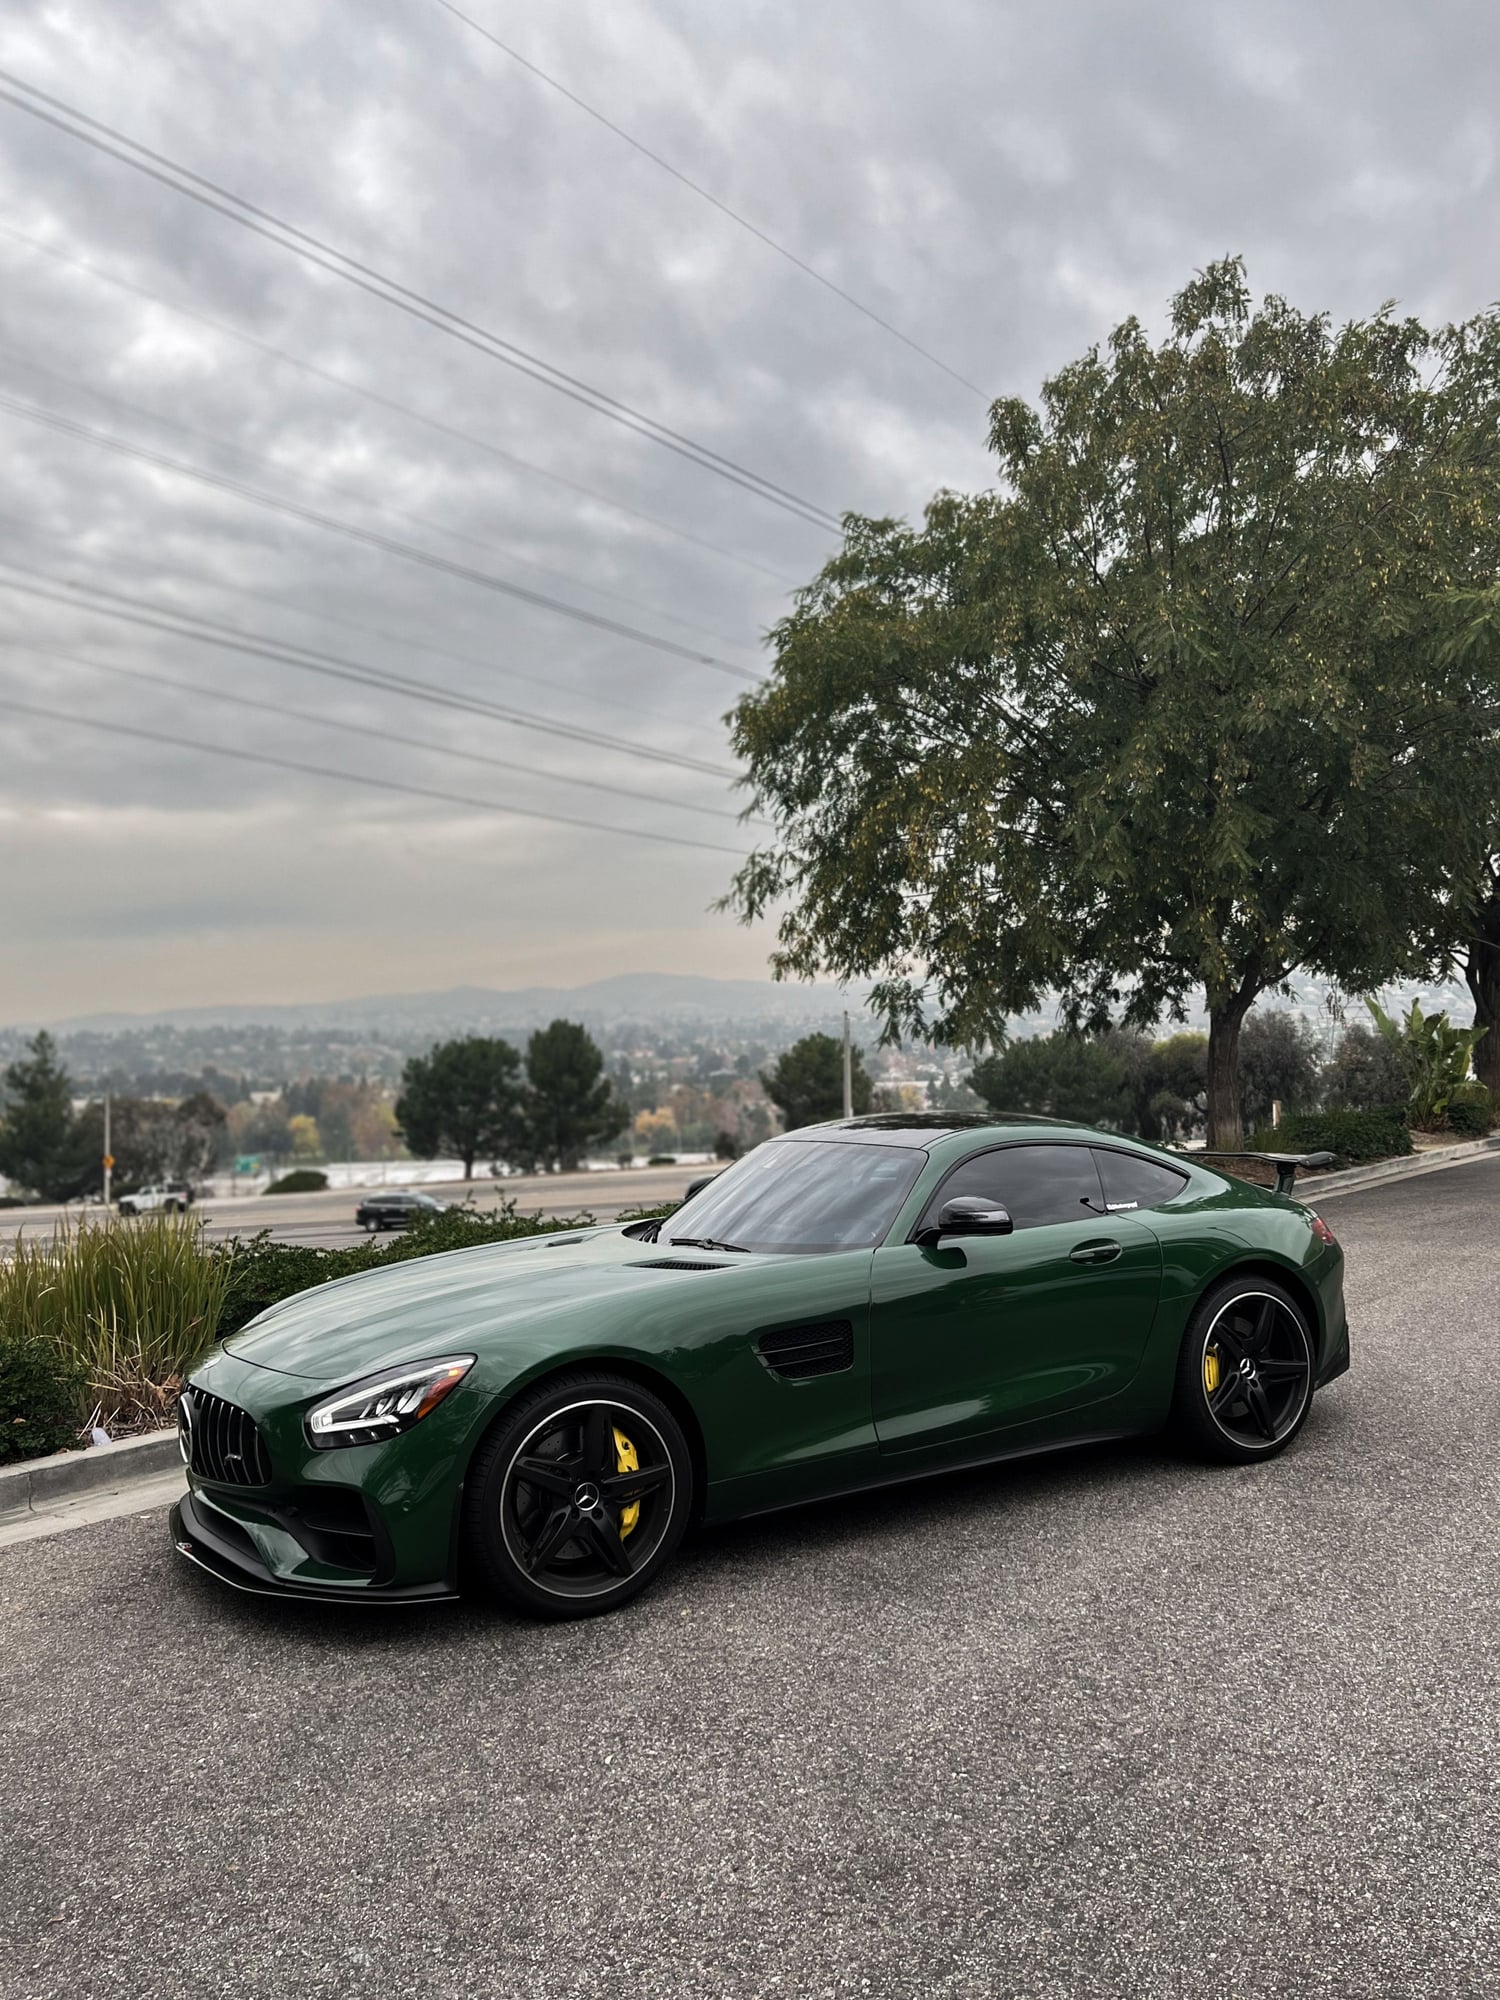 Wheels and Tires/Axles - OEM Wheels and Tires 2020 amg gt - Used - 2017 to 2021 Mercedes-Benz AMG GT - Yorba Linda, CA 92886, United States